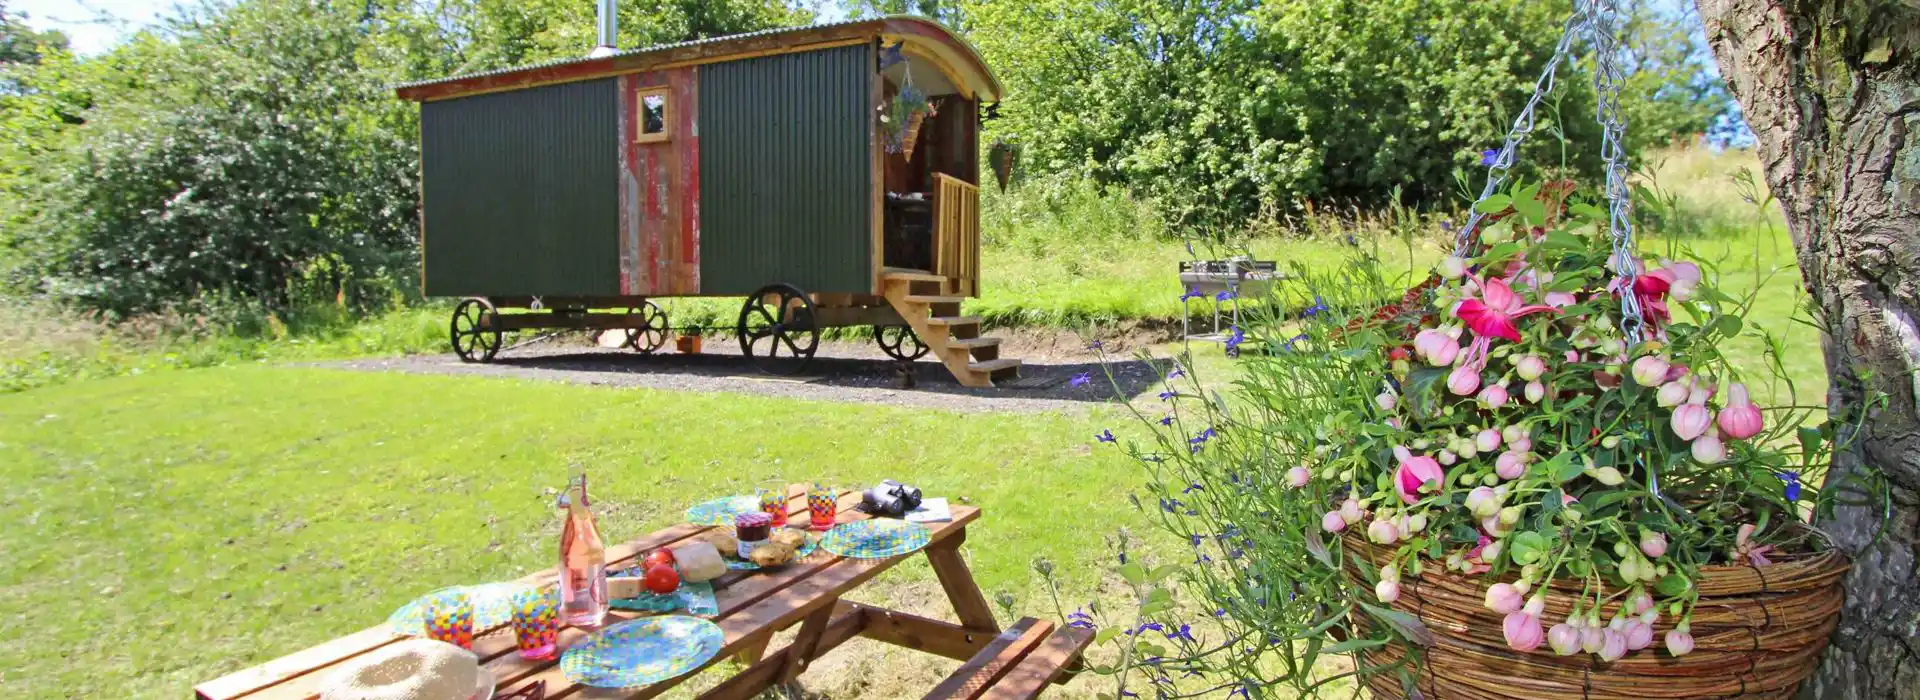 Glamping in the North East